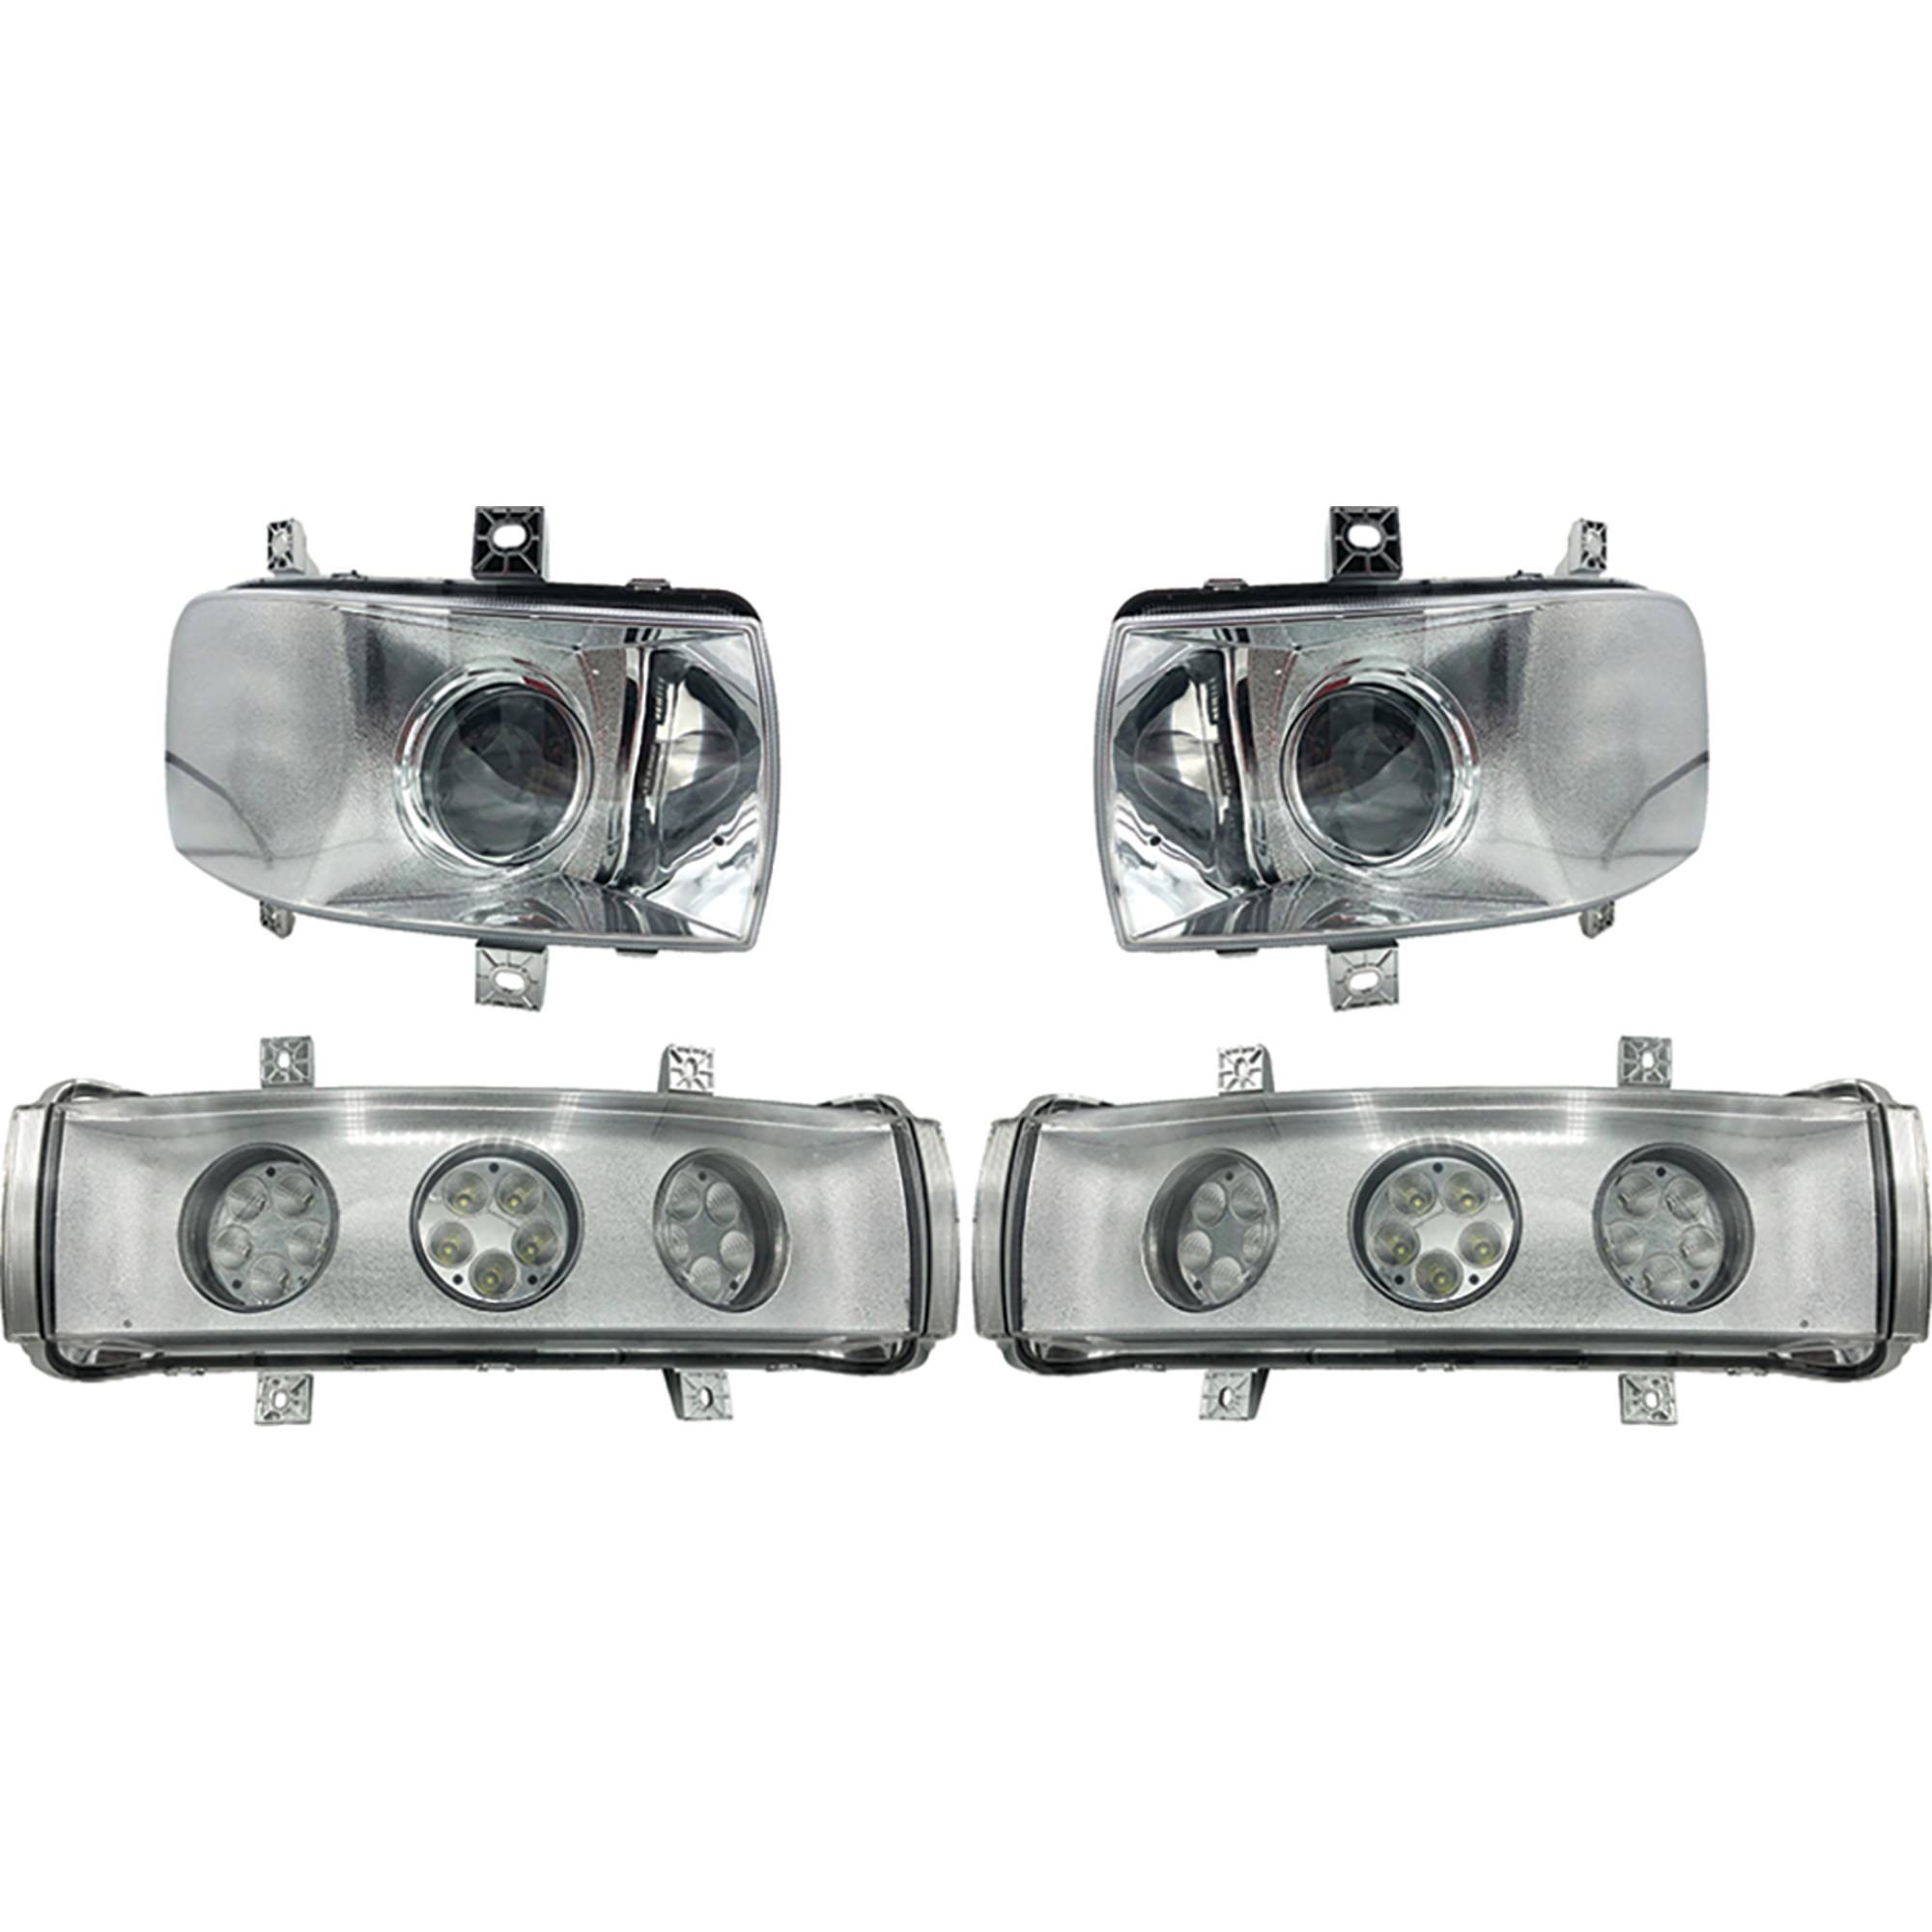 LED Headlight Kit for Tractors, CaseKit13Agricultural LED Lights from